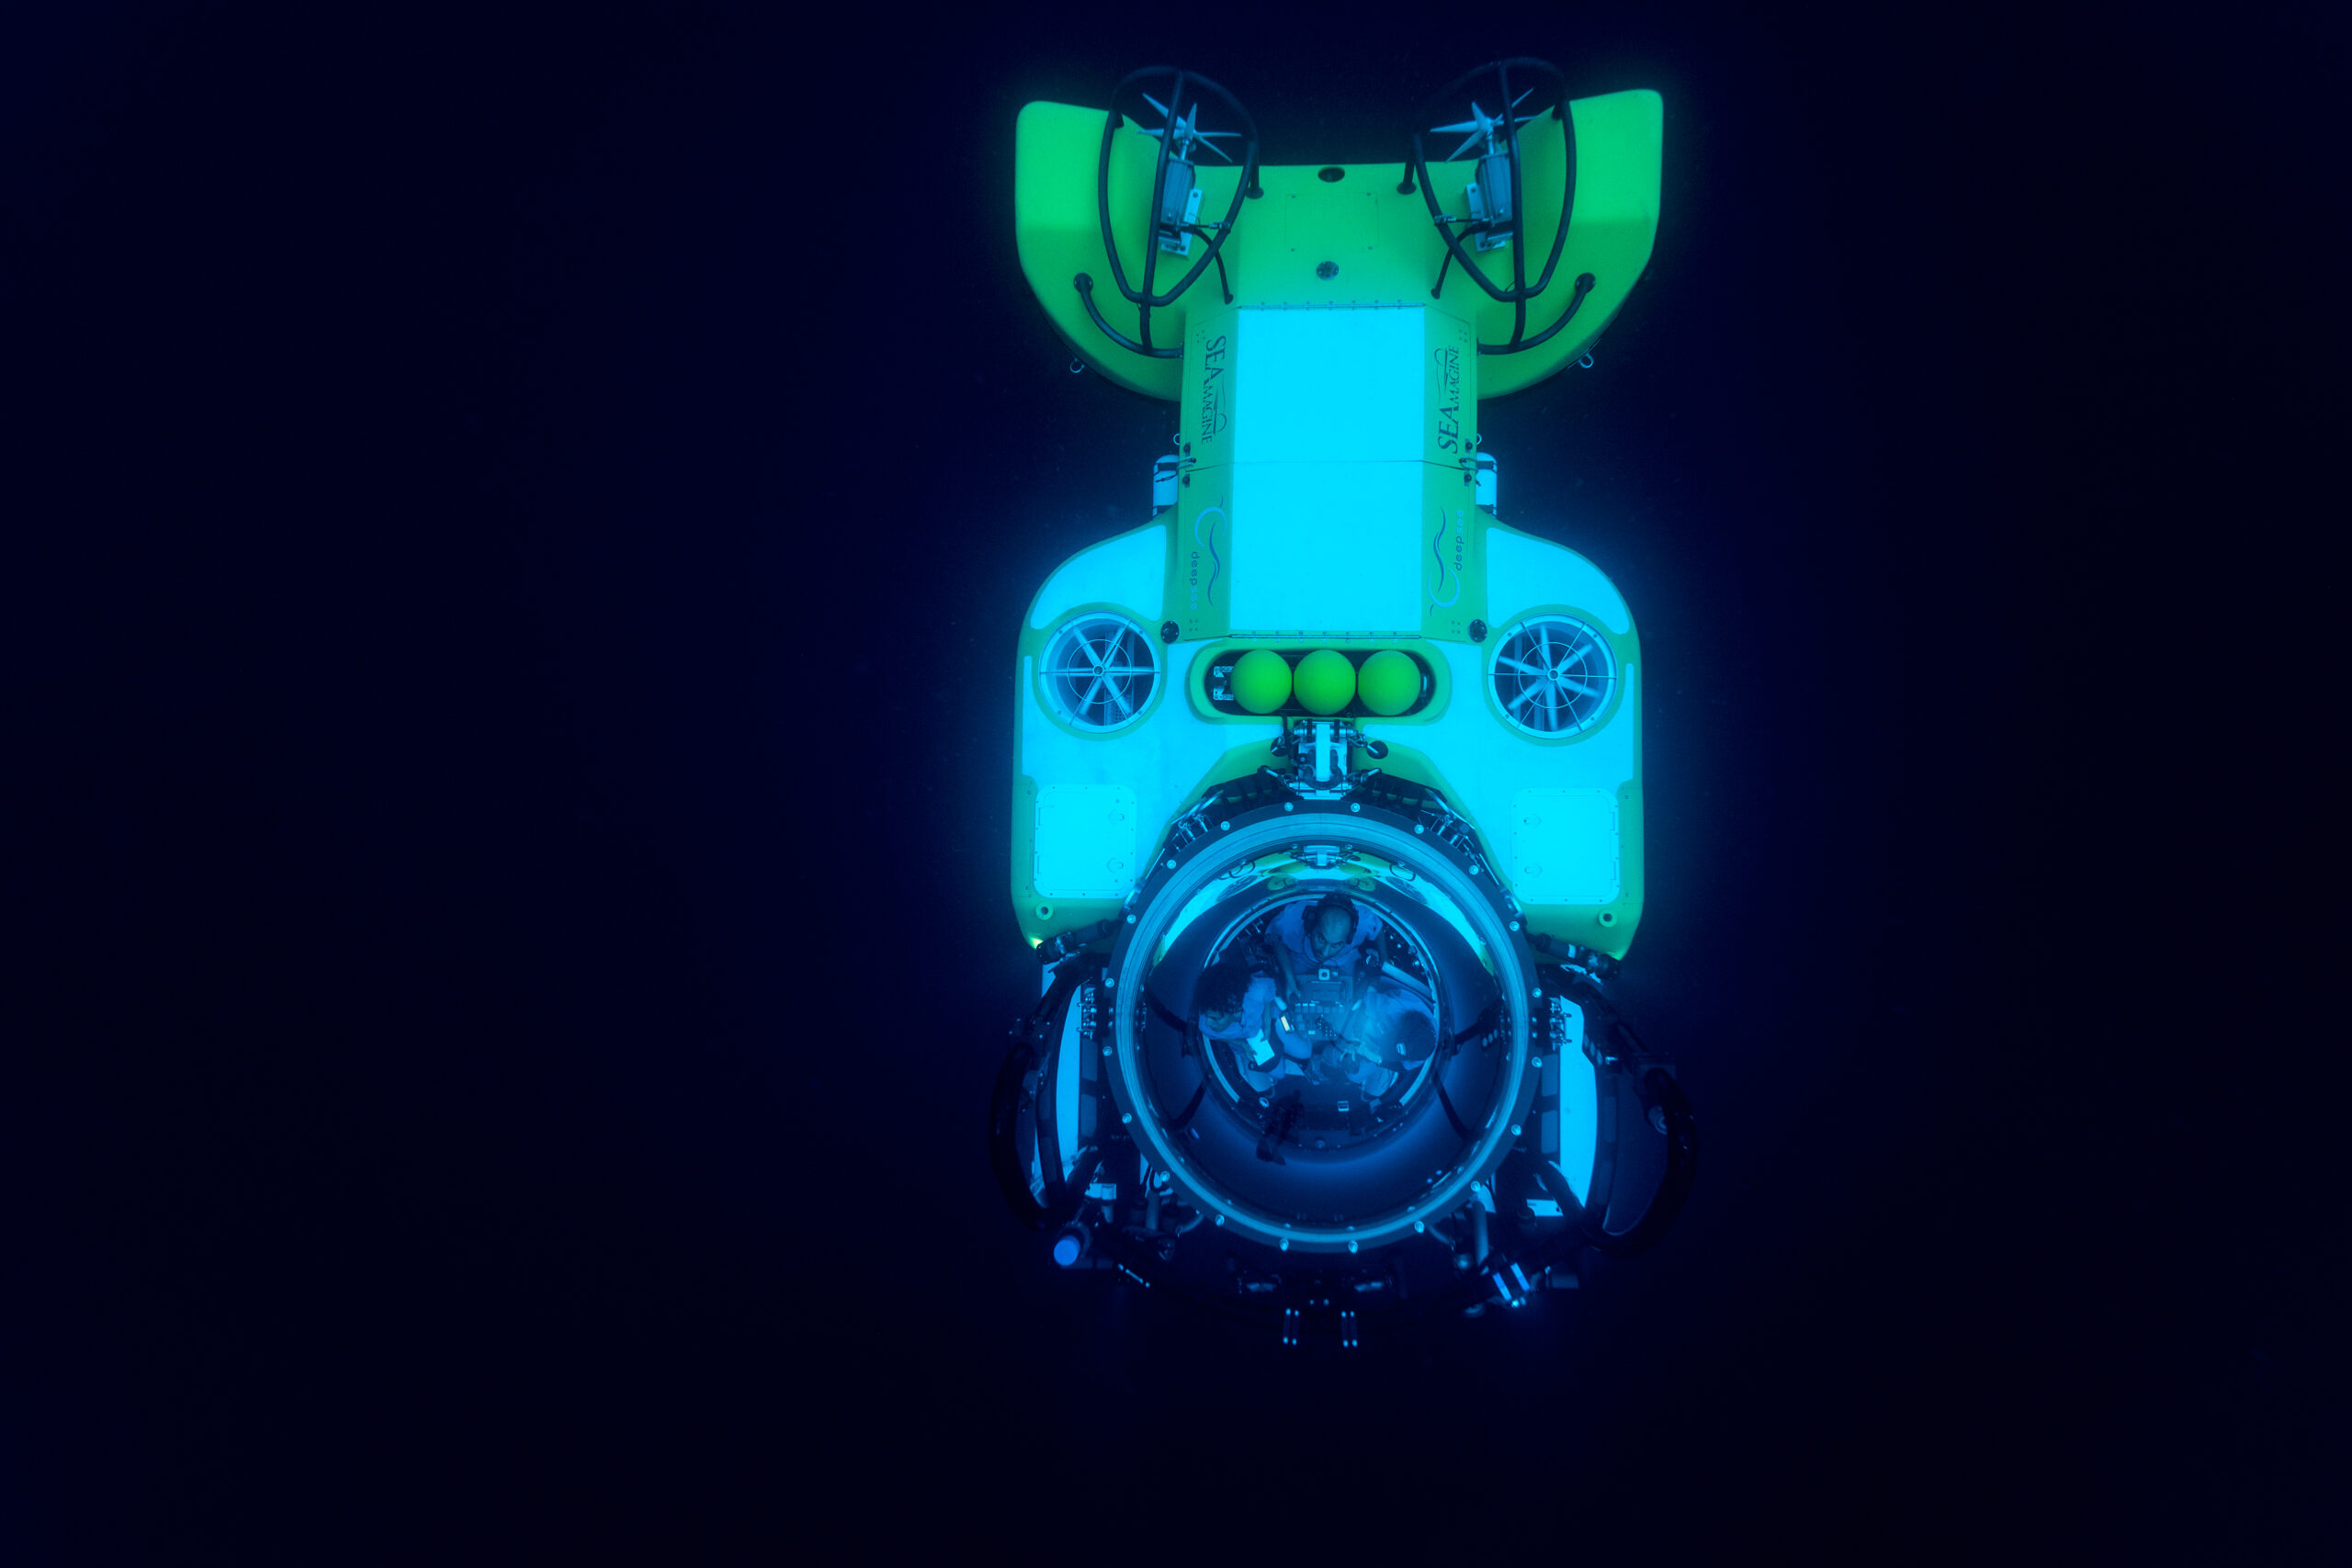 Sylvia Earle and Salome Buglass descend in
the DeepSee submersible in search of deep
sea kelp that may be new to science, during
the Mission Blue Galápagos expedition in
2022.